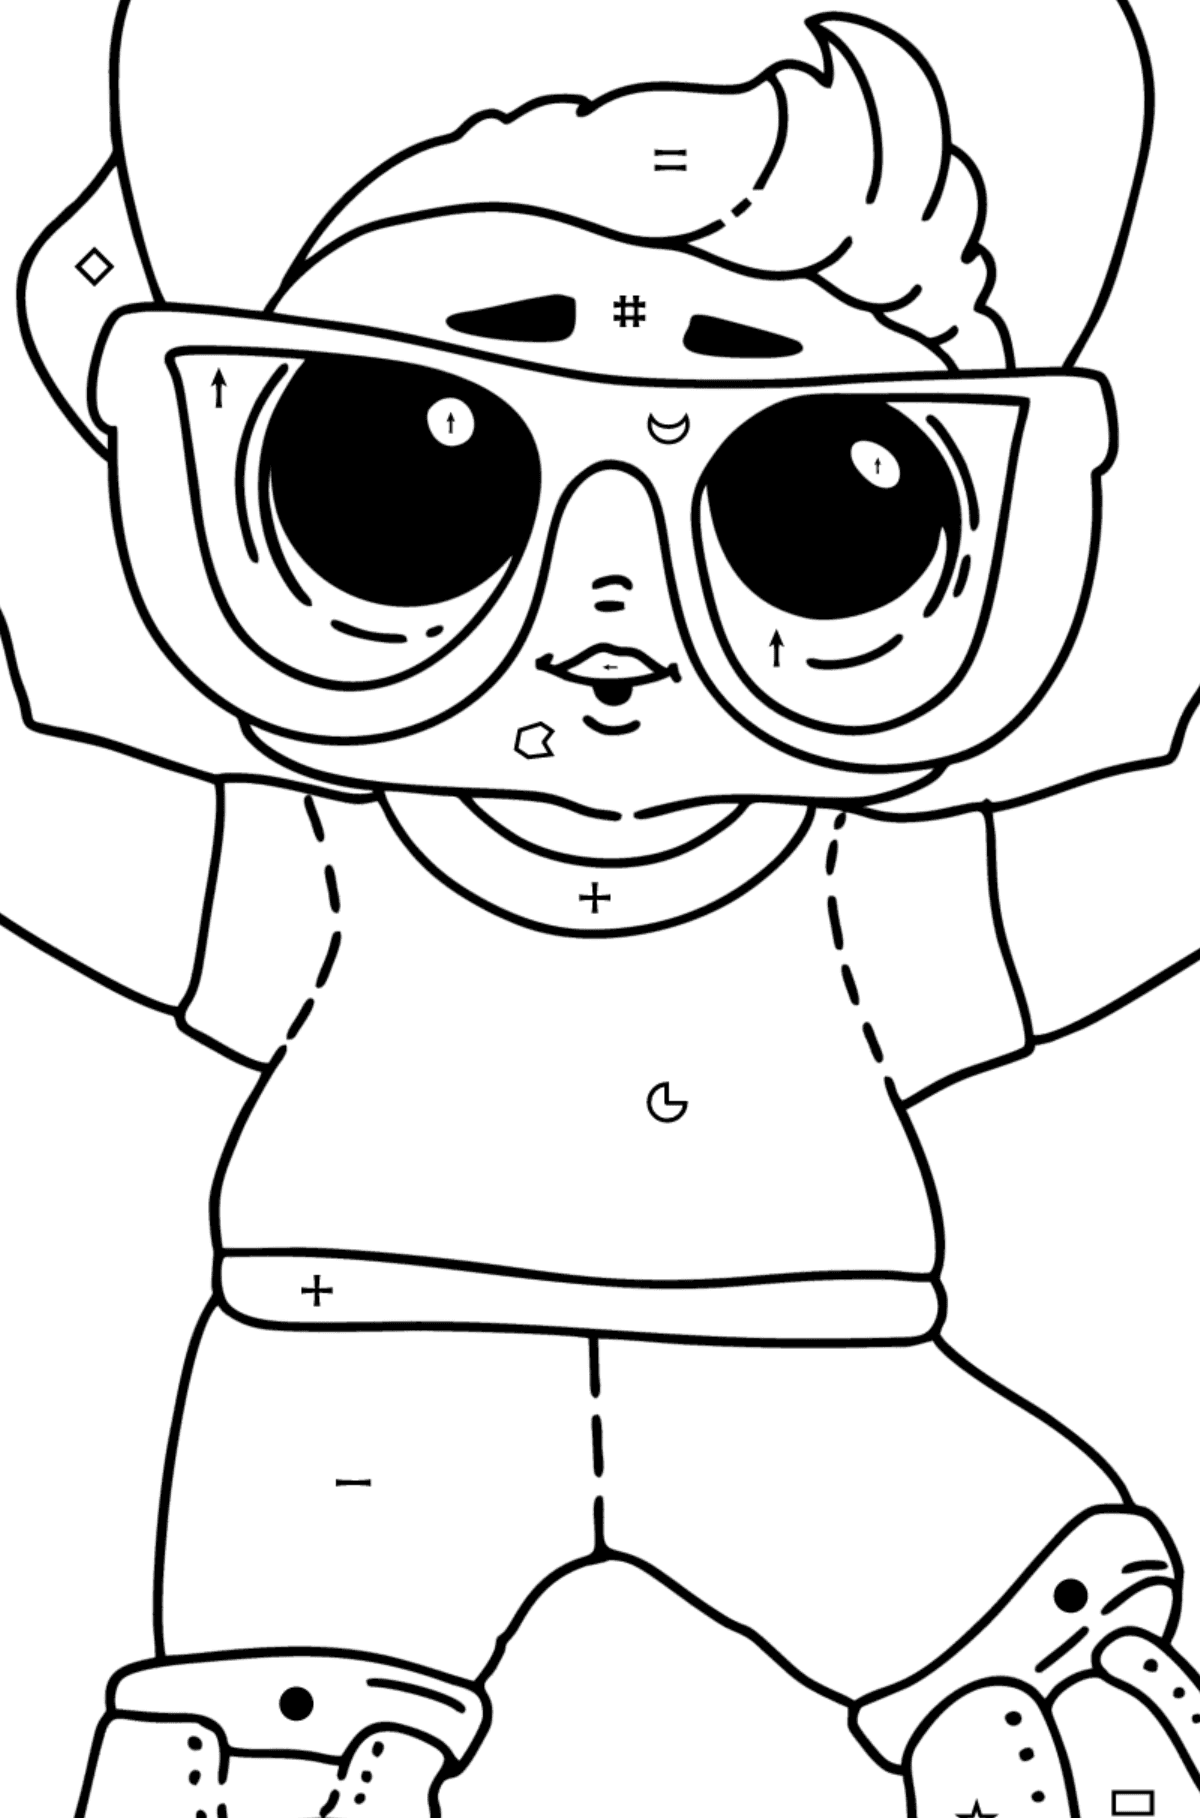 Coloring page LOL boy Next Door - Coloring by Symbols and Geometric Shapes for Kids